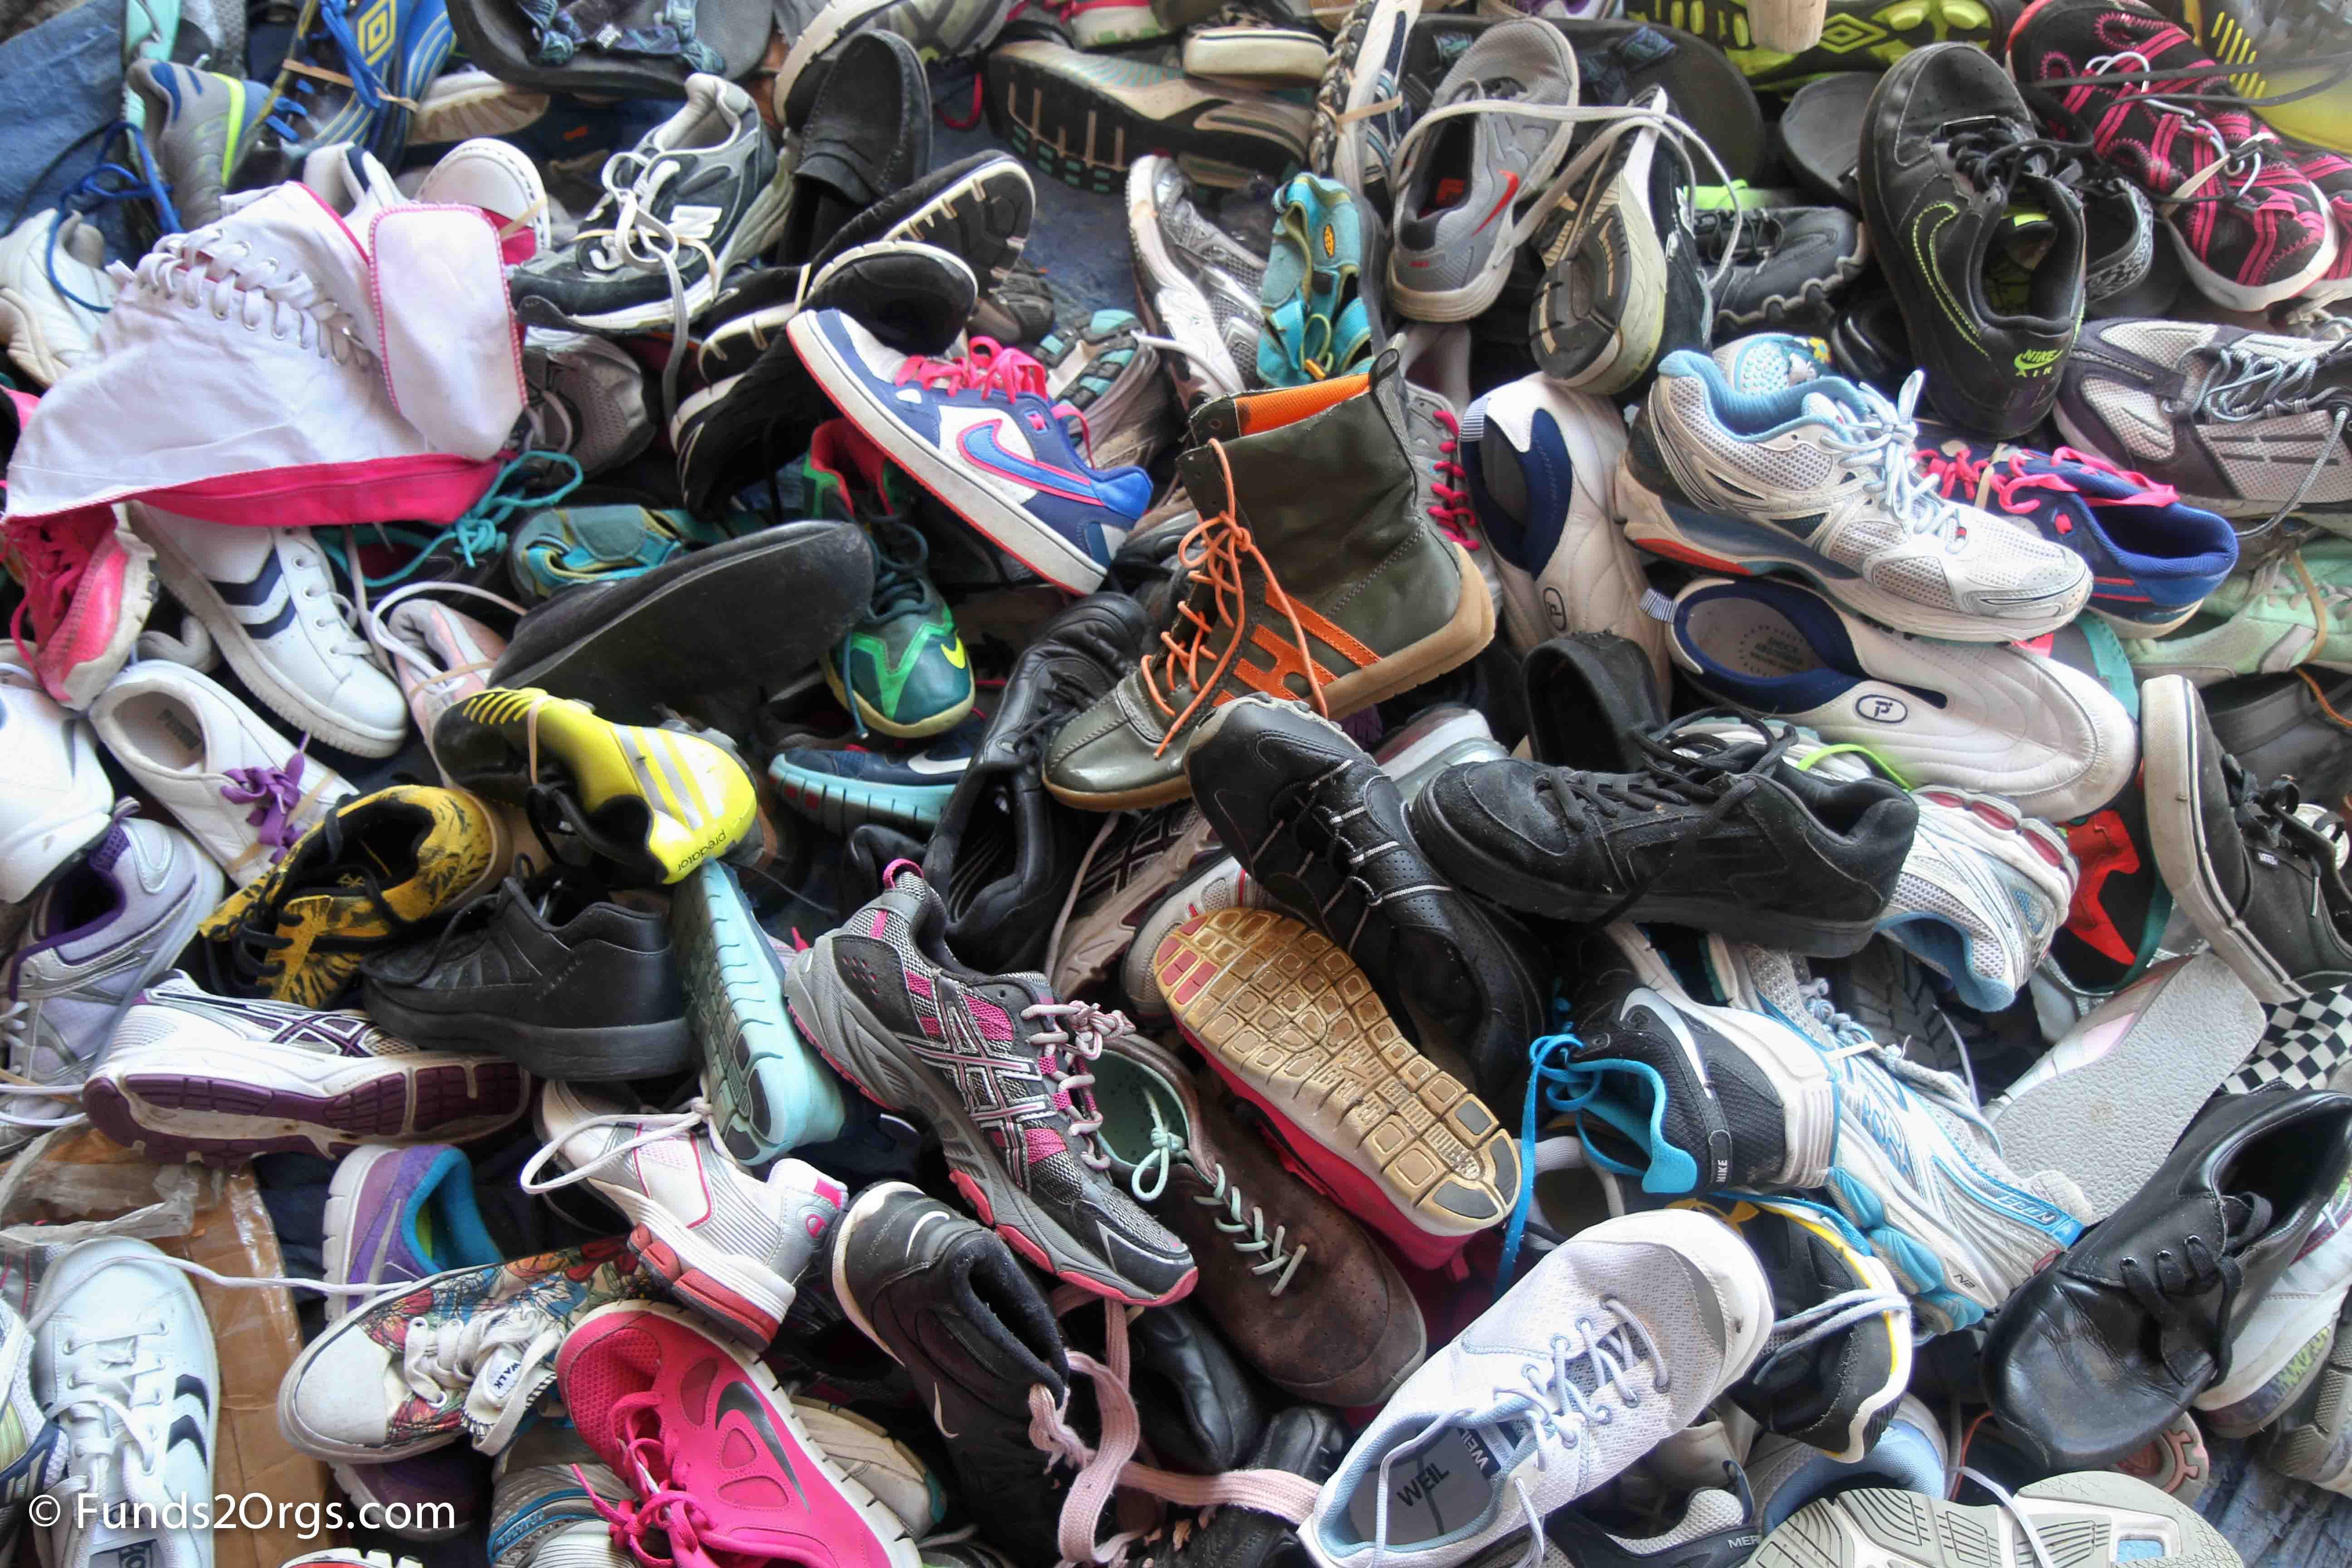 Funds2Orgs, the Nation’s Largest Shoe Drive Fundraising Company ...